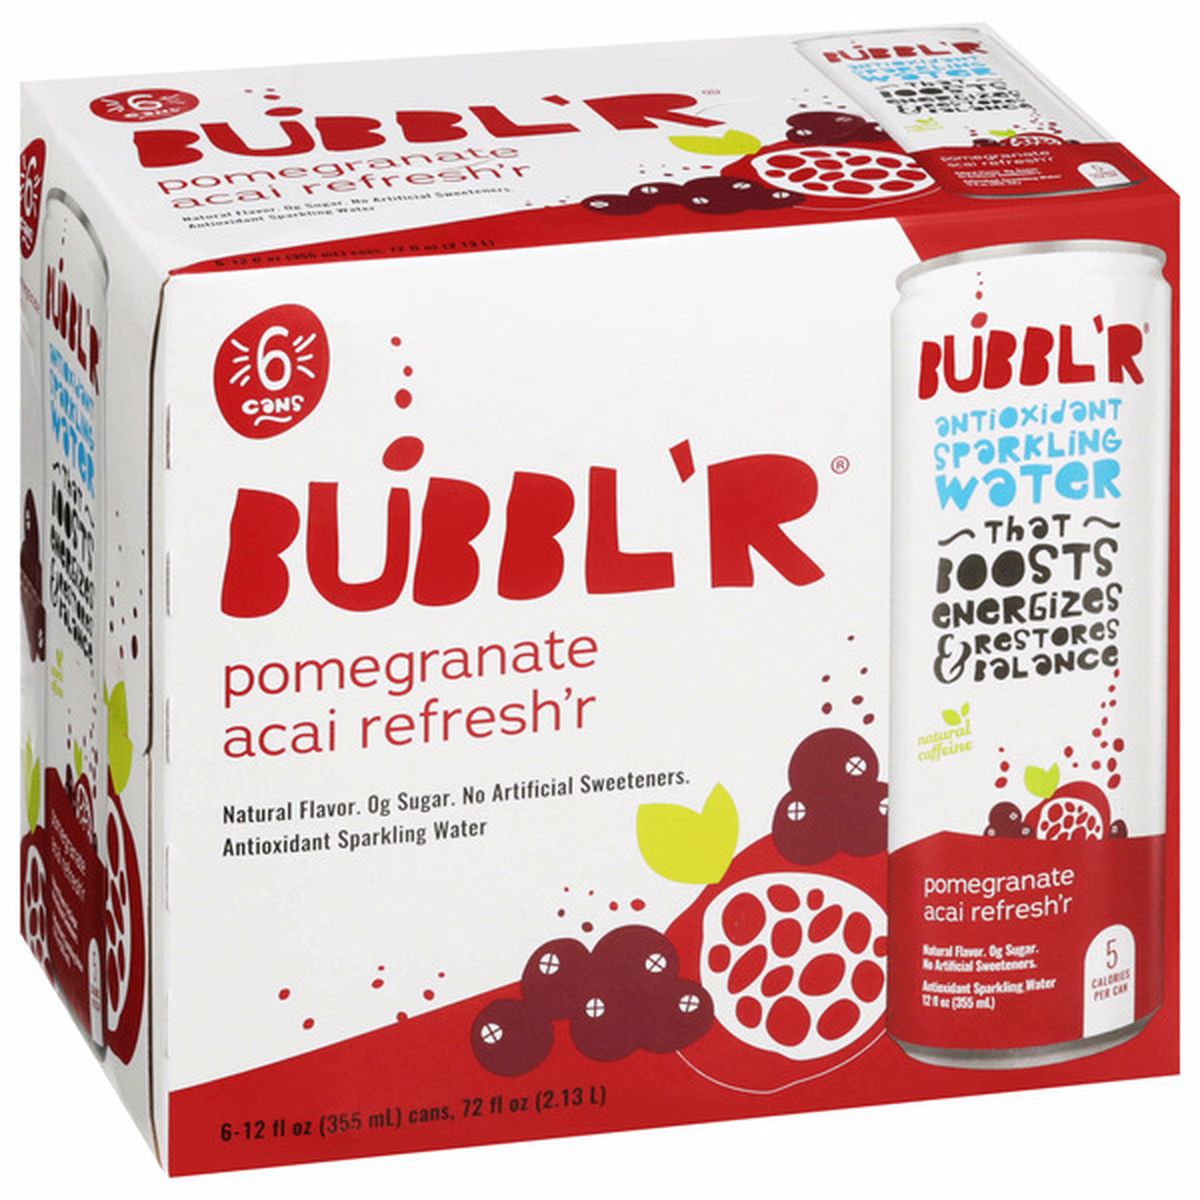 BUBBL'R Antioxidant Sparkling Water, pomegranate acai refresh'r (12 fl oz)  Delivery or Pickup Near Me - Instacart